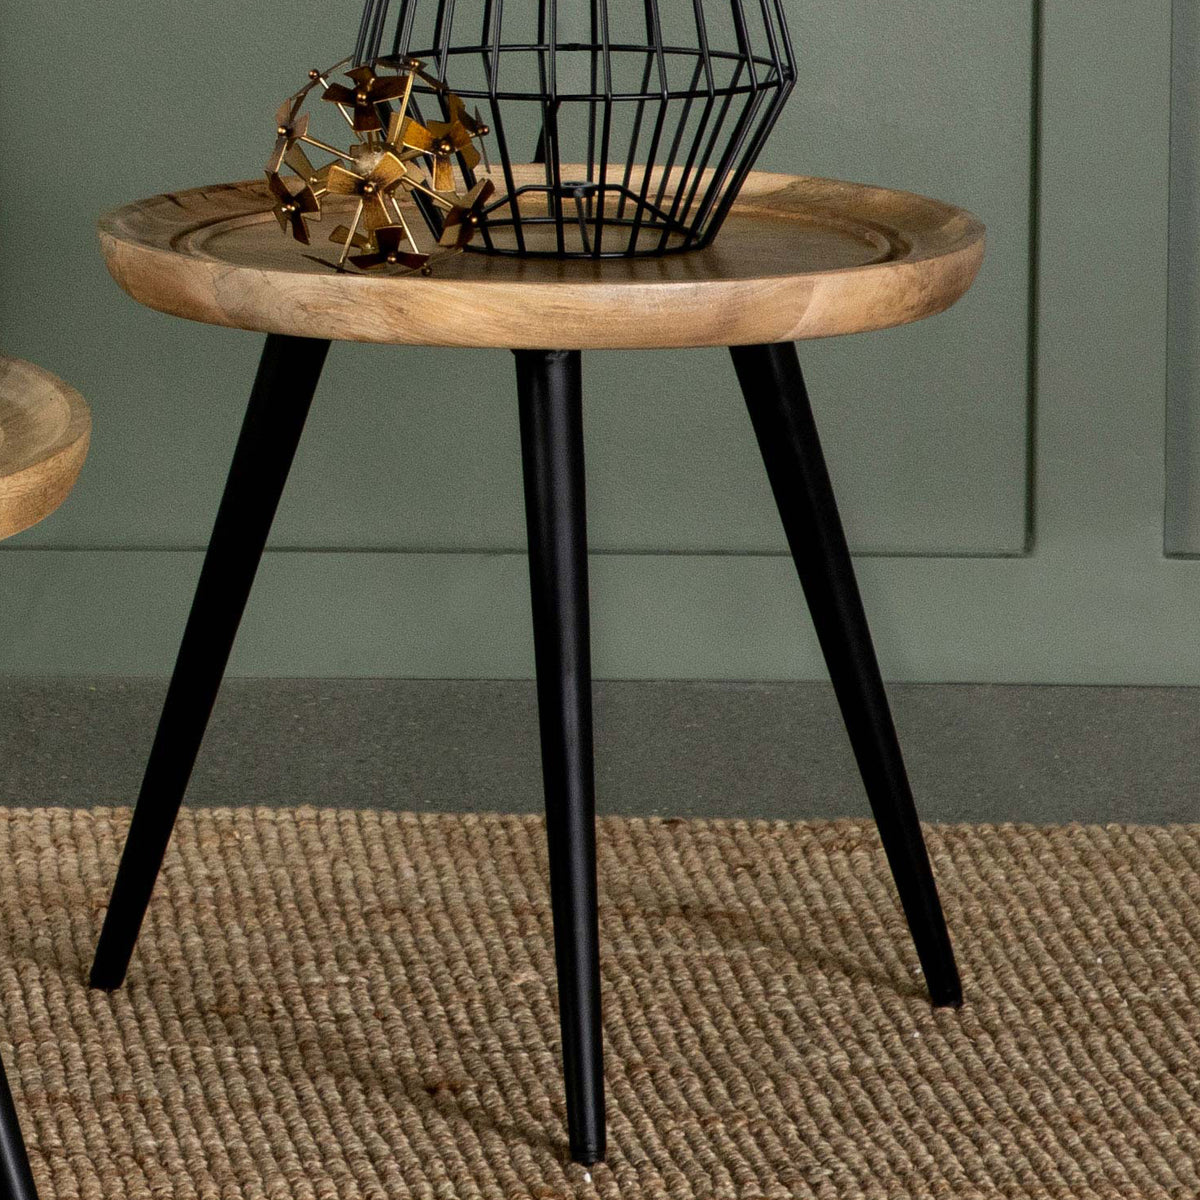 Zoe Round End Table with Trio Legs Natural and Black Zoe Round End Table with Trio Legs Natural and Black Half Price Furniture